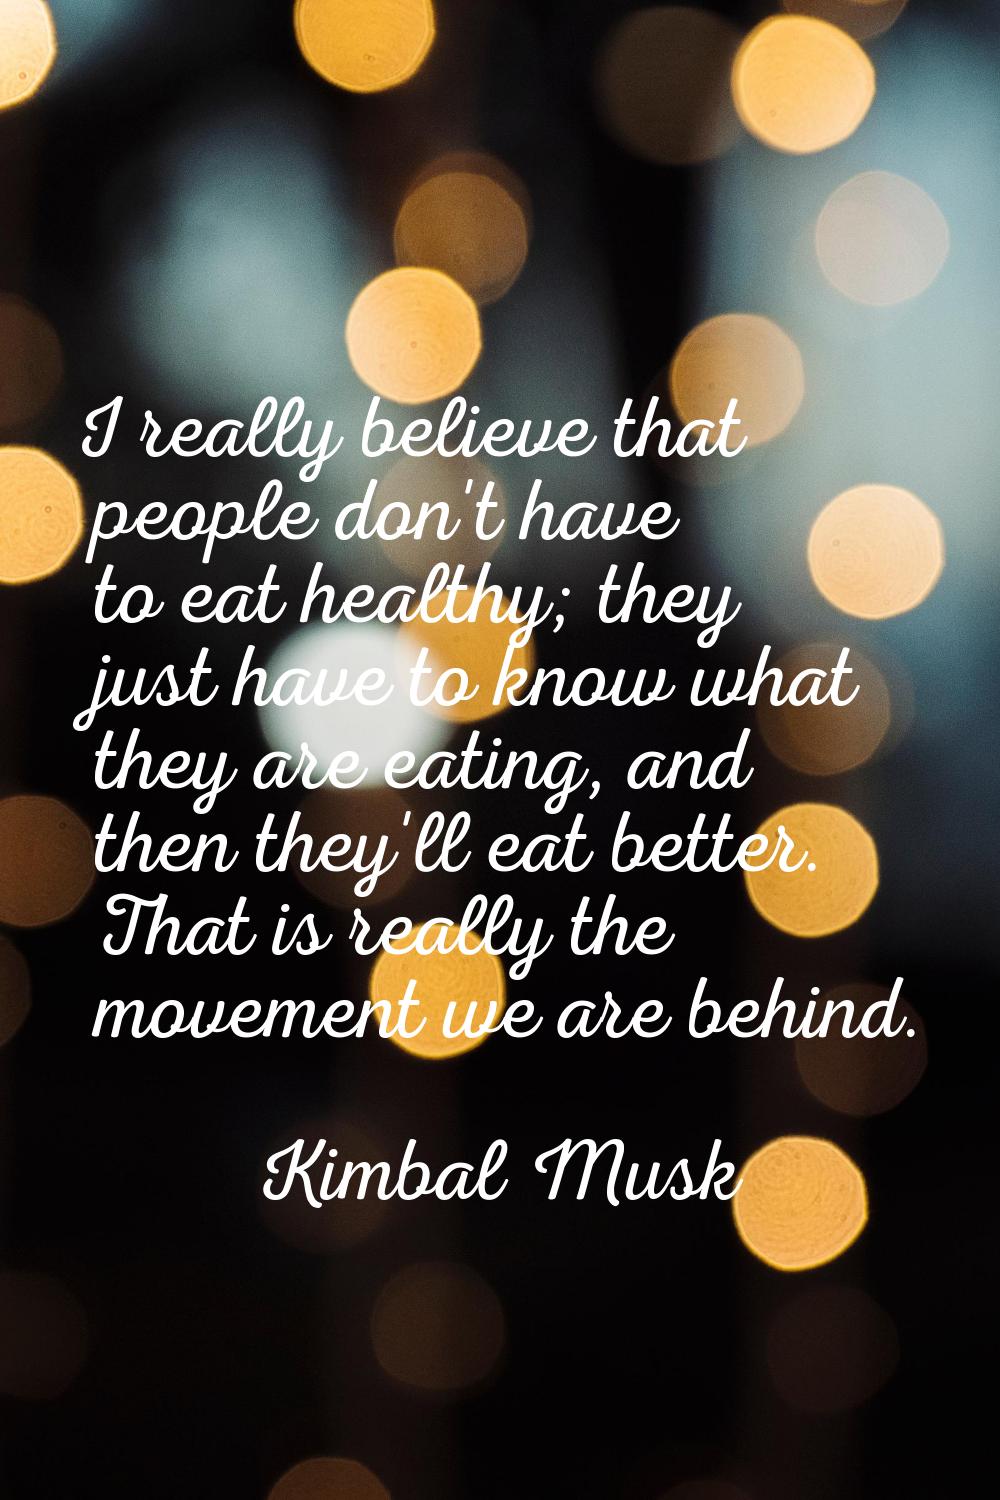 I really believe that people don't have to eat healthy; they just have to know what they are eating